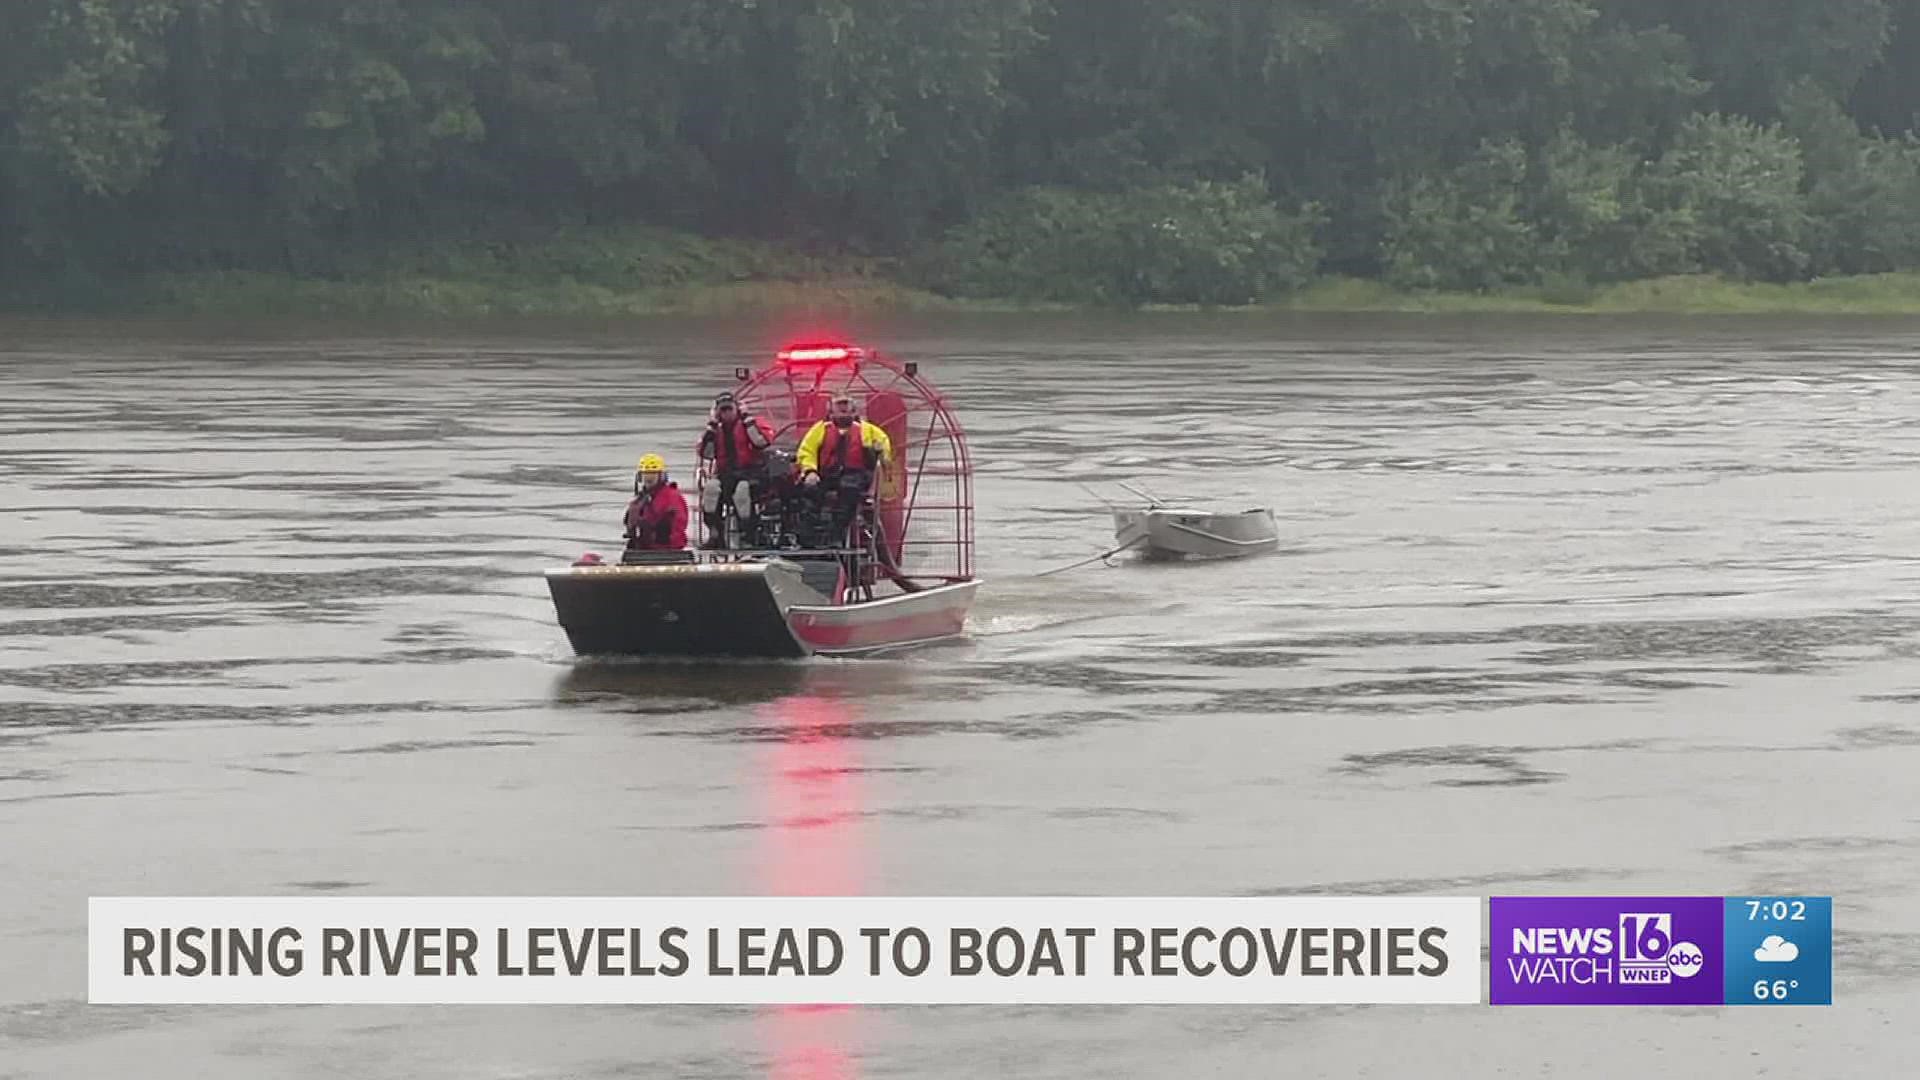 In the pouring rain, rescue crews were on the water to investigate reports of unmanned boats.